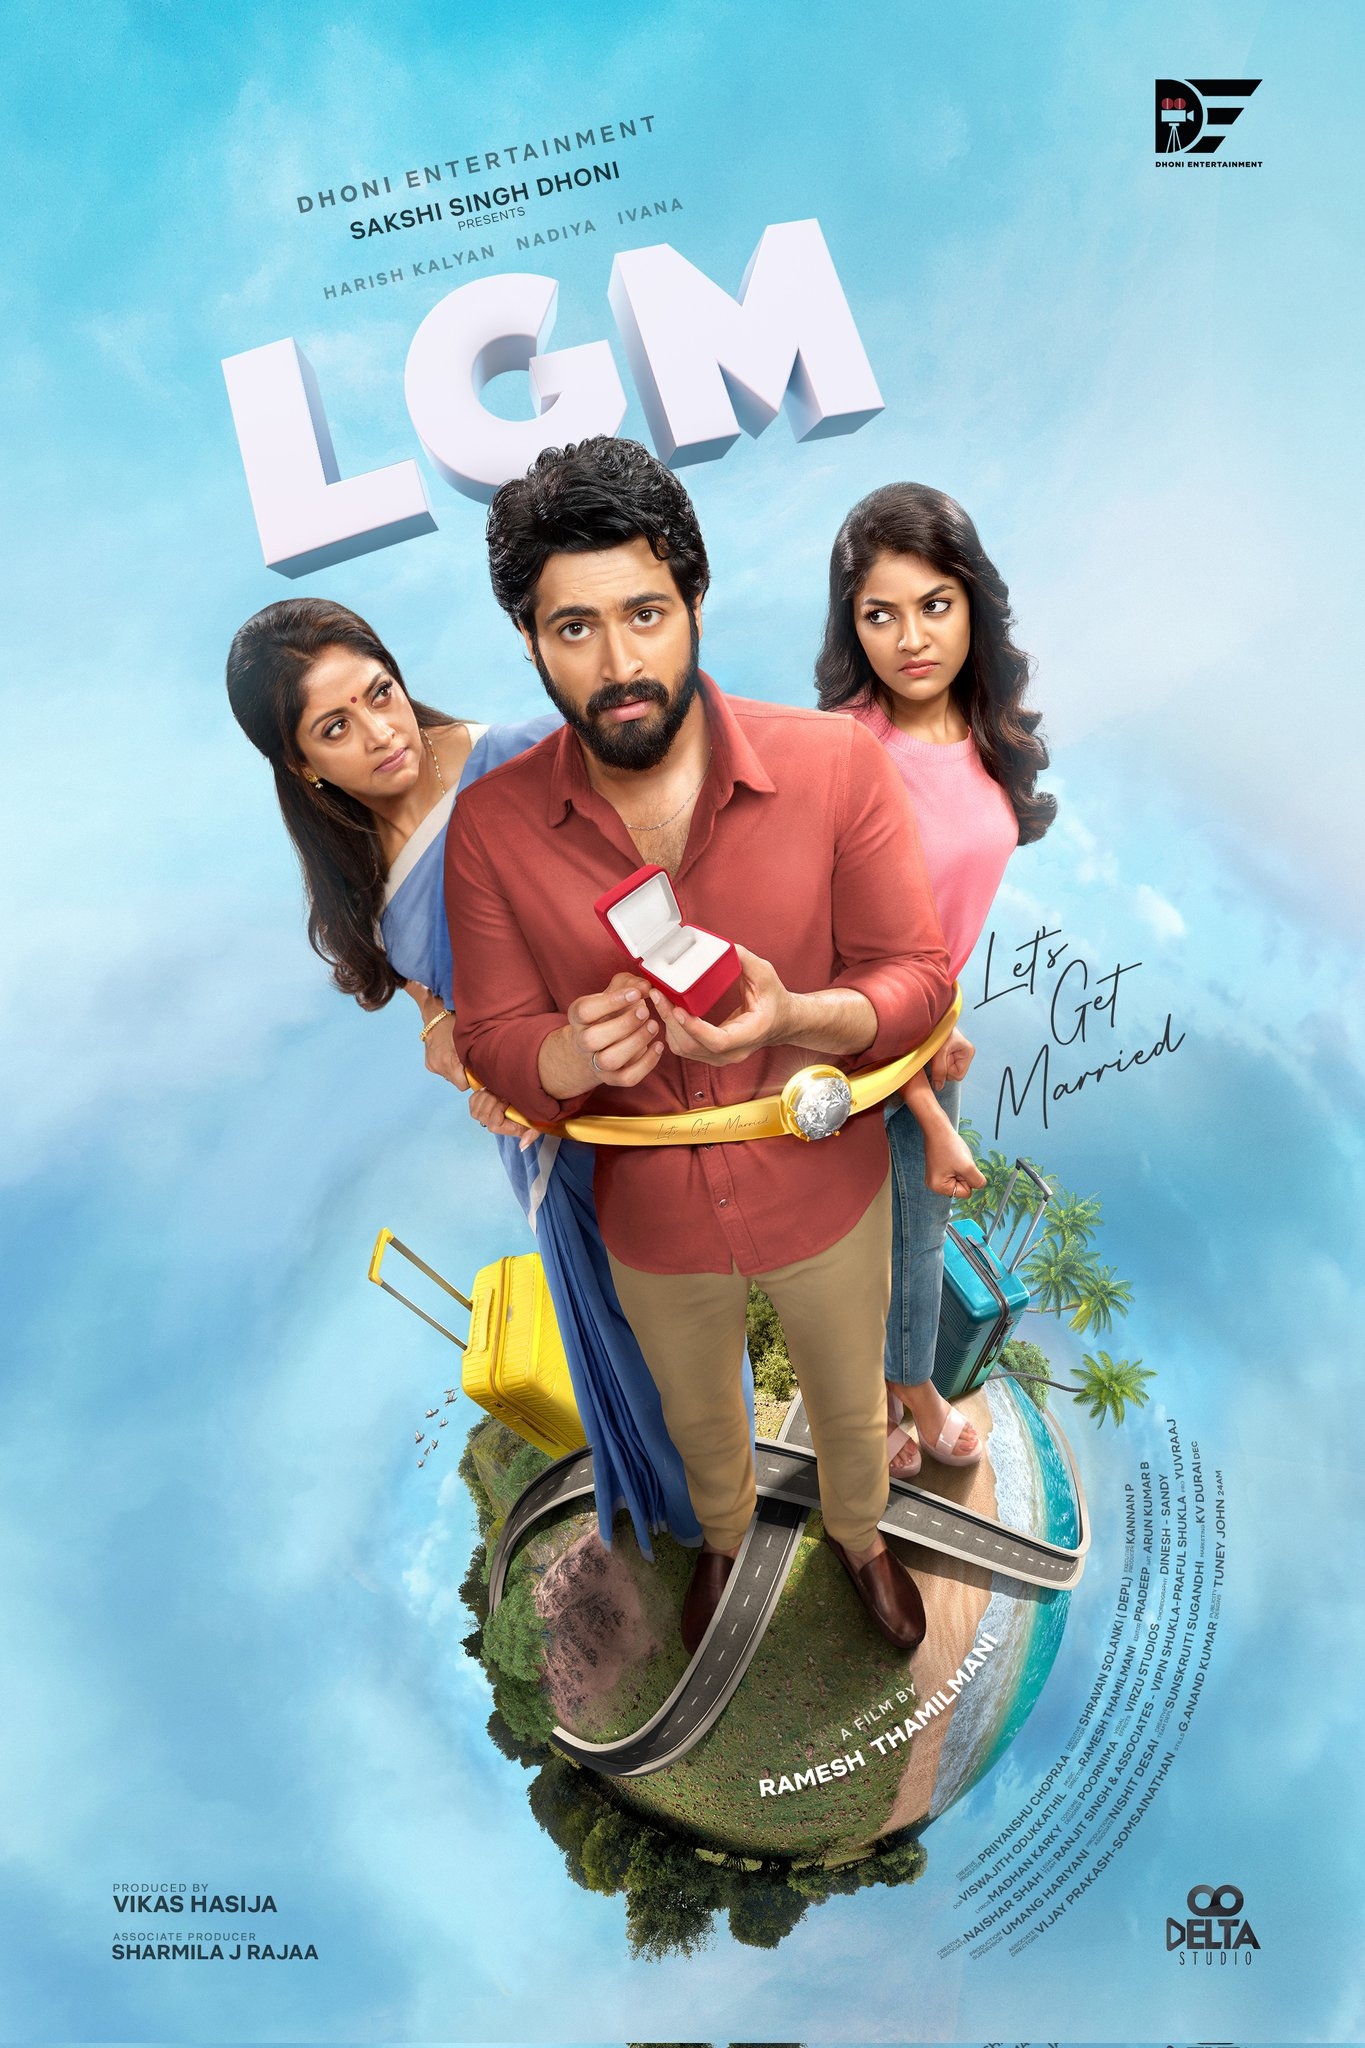 lgm movie review in tamil